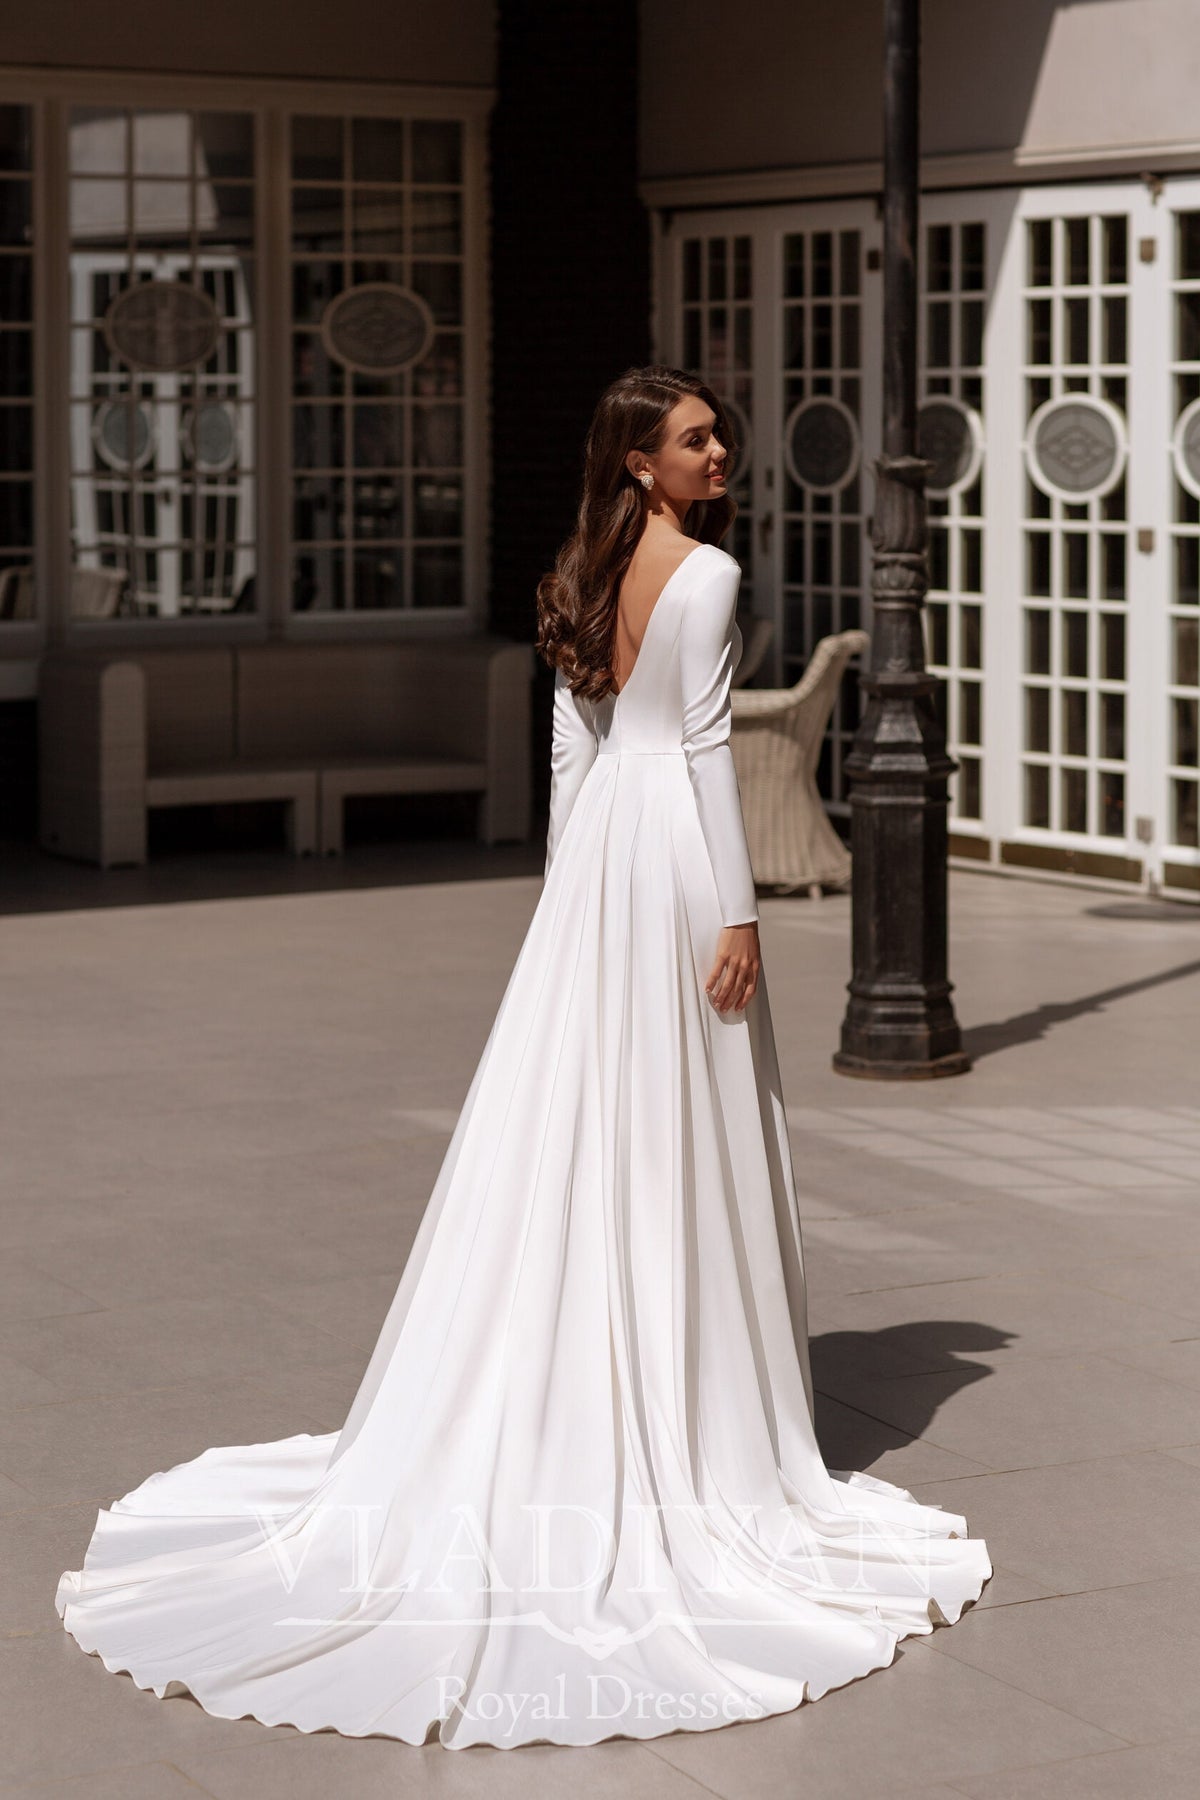 Classic Satin Luxury Wedding Dress Bridal Gown Long Sleeves V Neckline Open Back with Train Aline Minimalist Simple